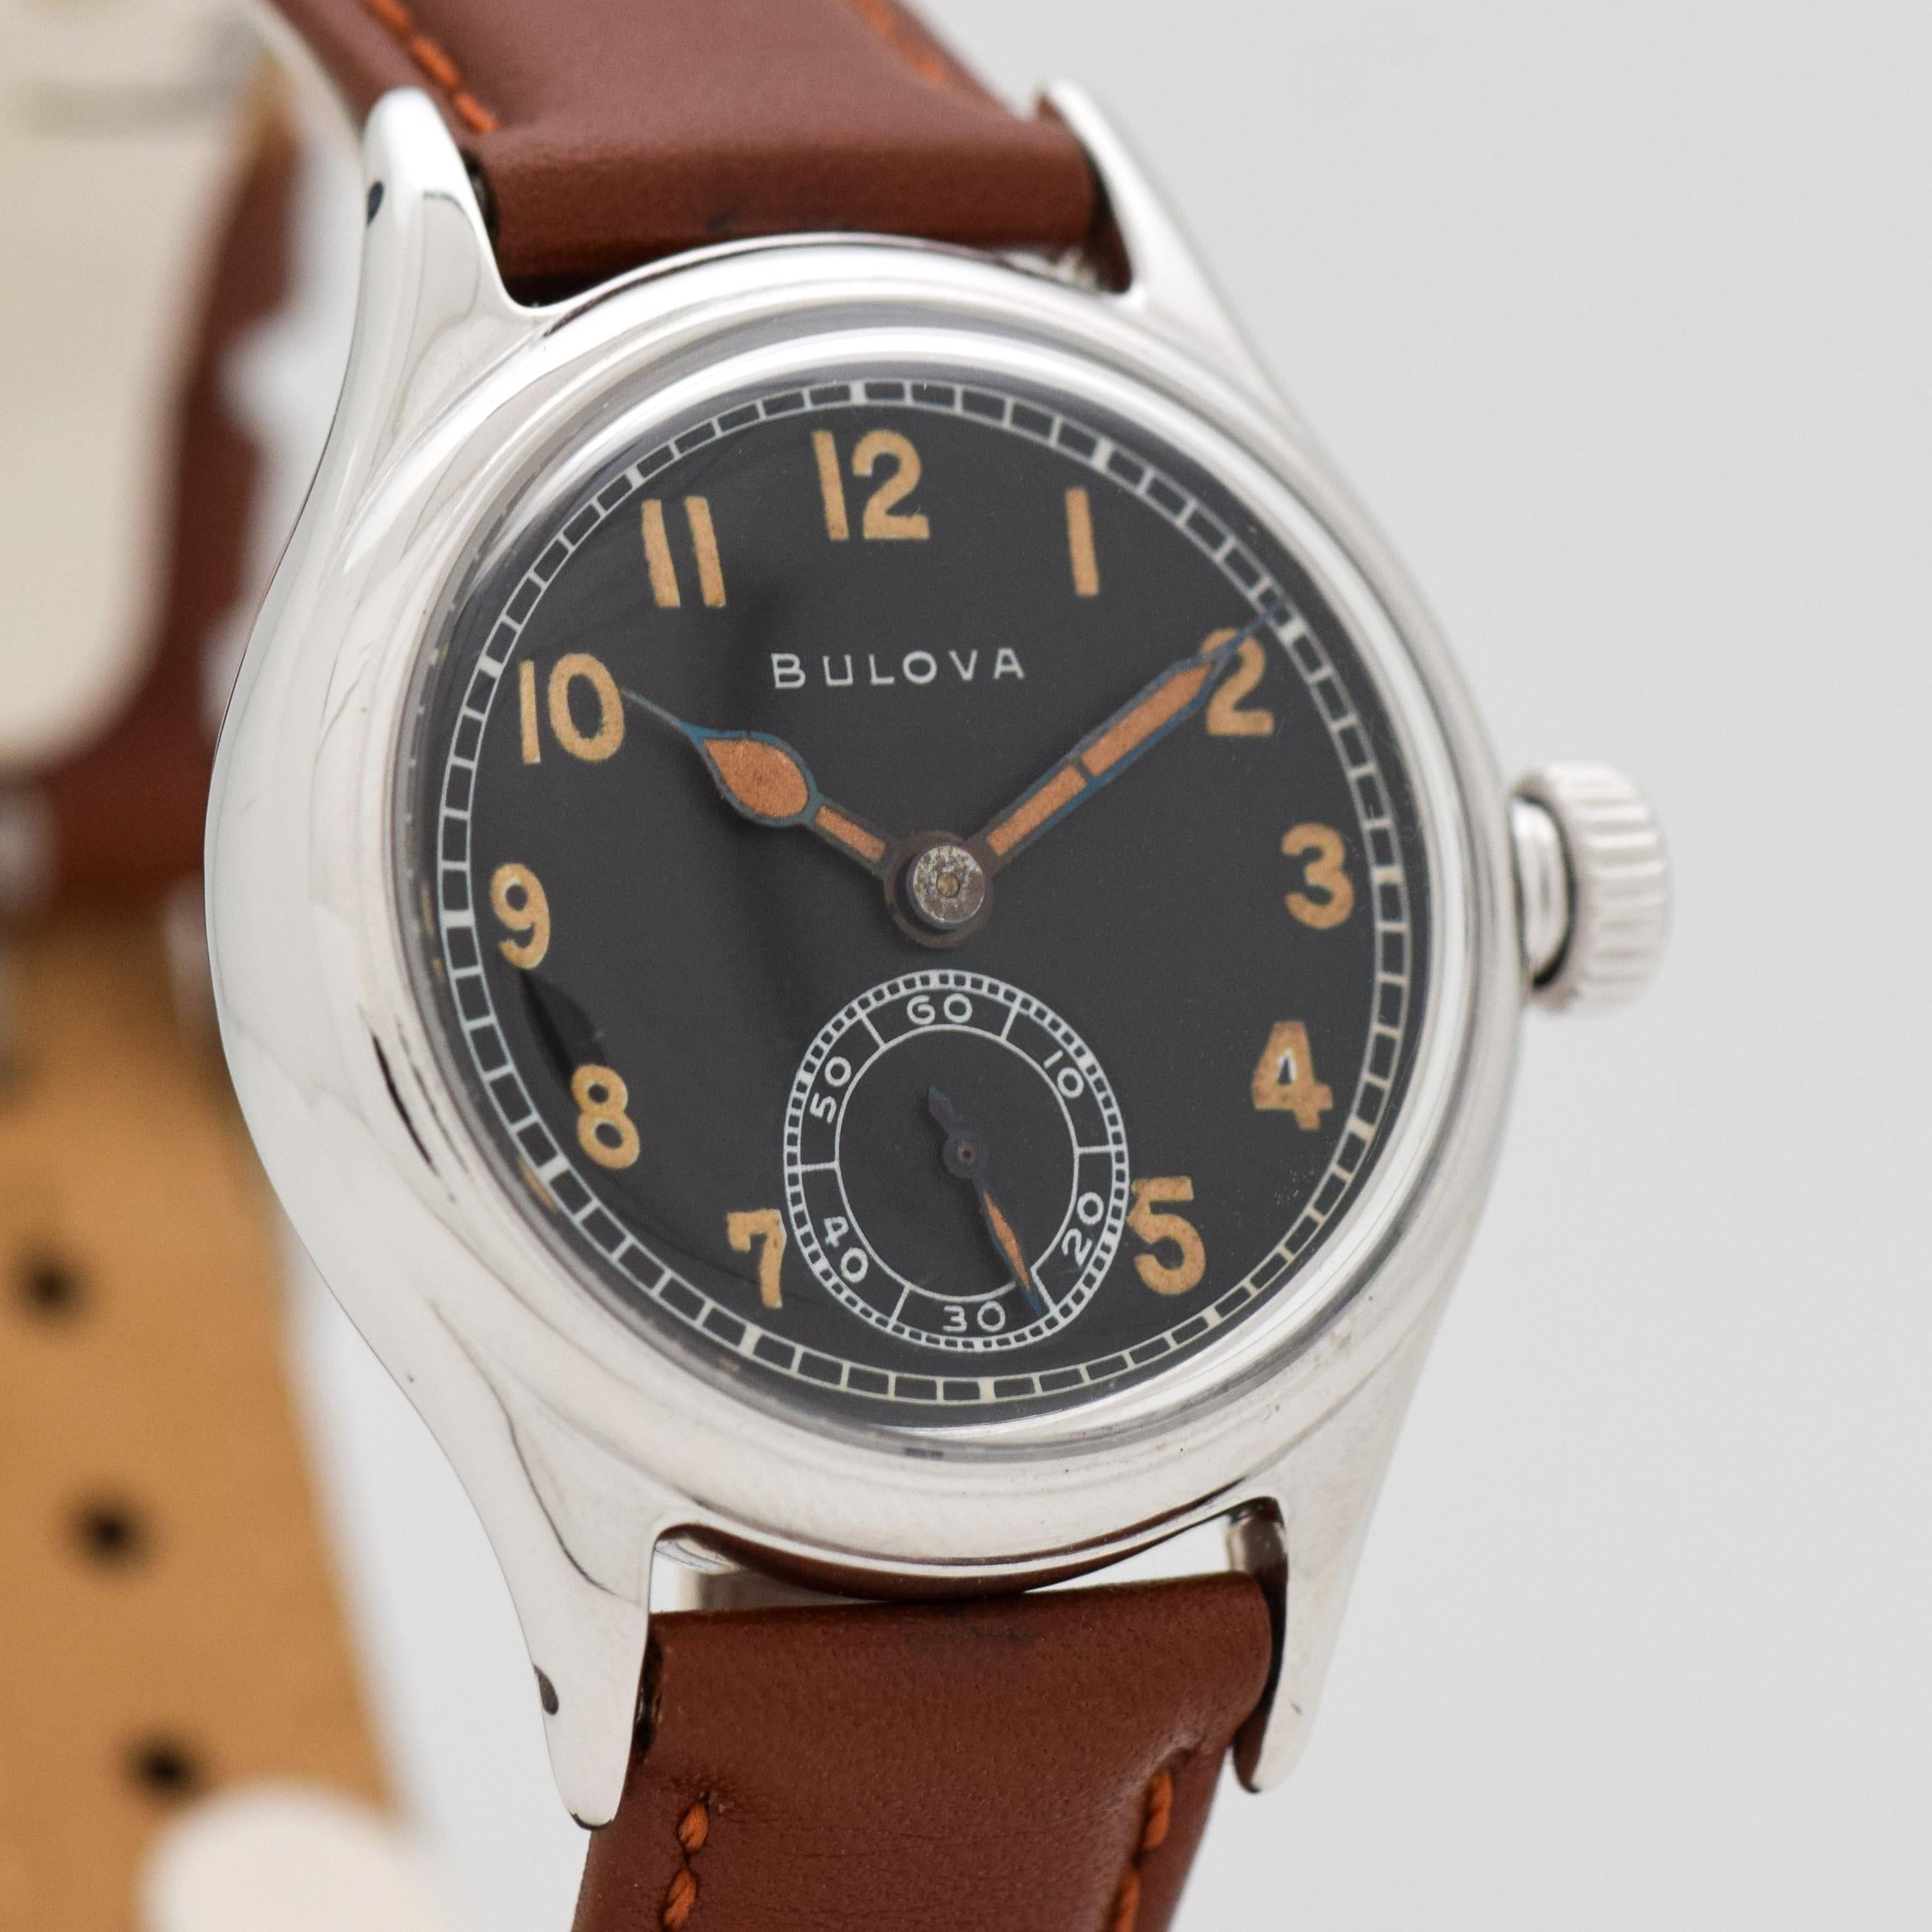 1944 Vintage Bulova WWII Military Chrome watch with Original Black Dial with Light Brown Luminous Arabic Numbers. Case sized, 32mm x 39mm lug to lug (1.26 in. x 1.54 in.) - Powered by a 15-jewel, manual caliber movement. Triple Signed.